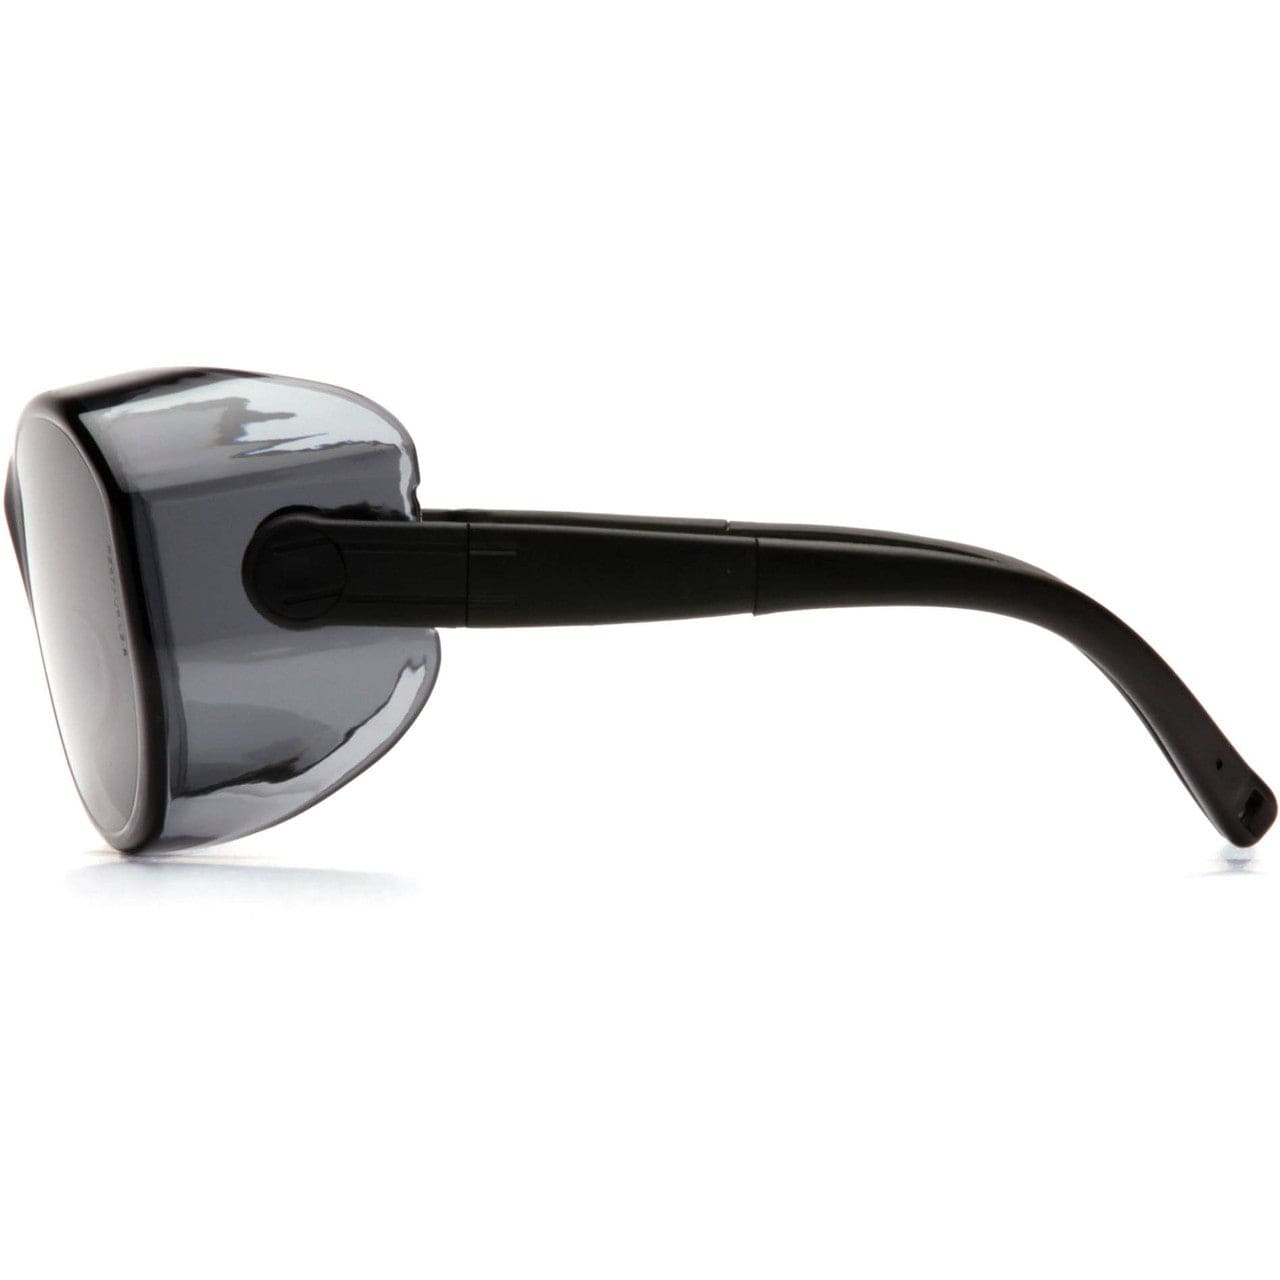 Pyramex OTS XL S7520SJ Over-Prescription Safety Glasses with Large Gray Lens Side View